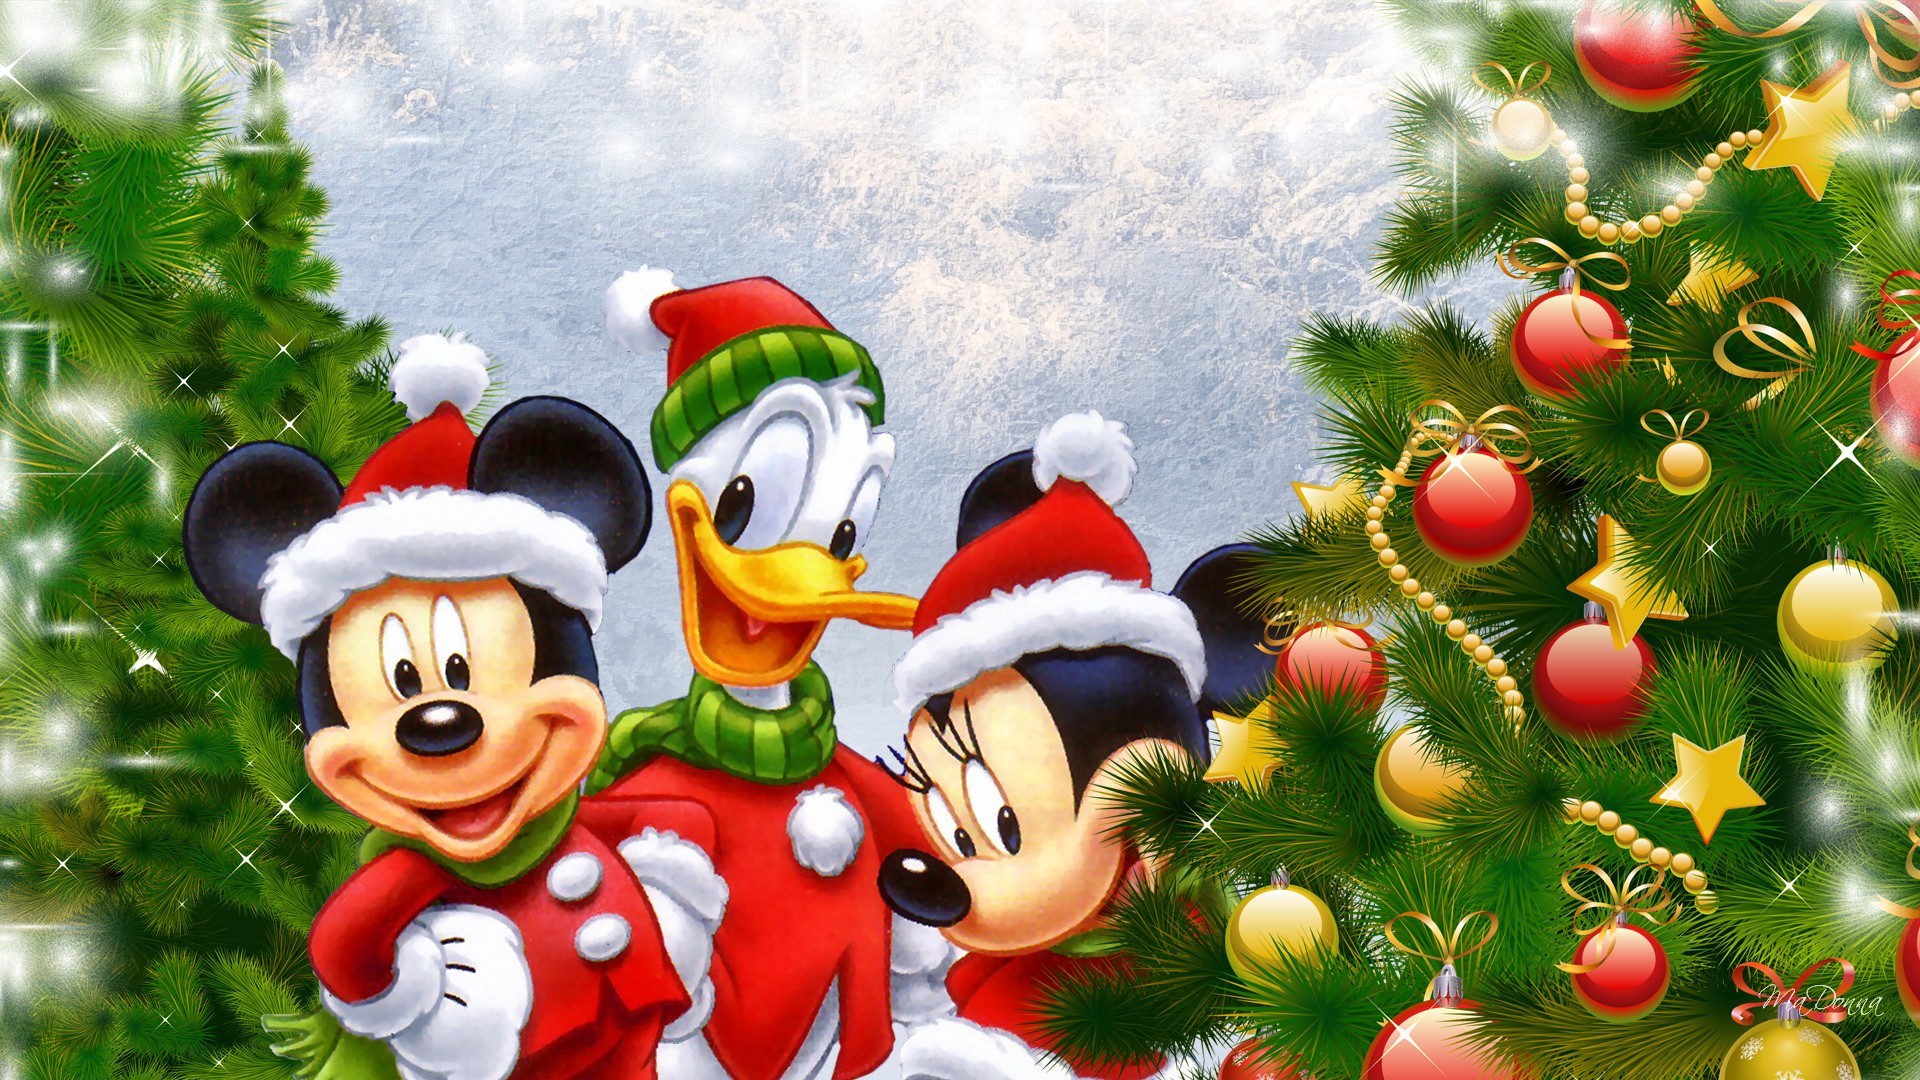 1920x1080 ... disney donald duck mickey and minnie mouse christmas tree desktop ...